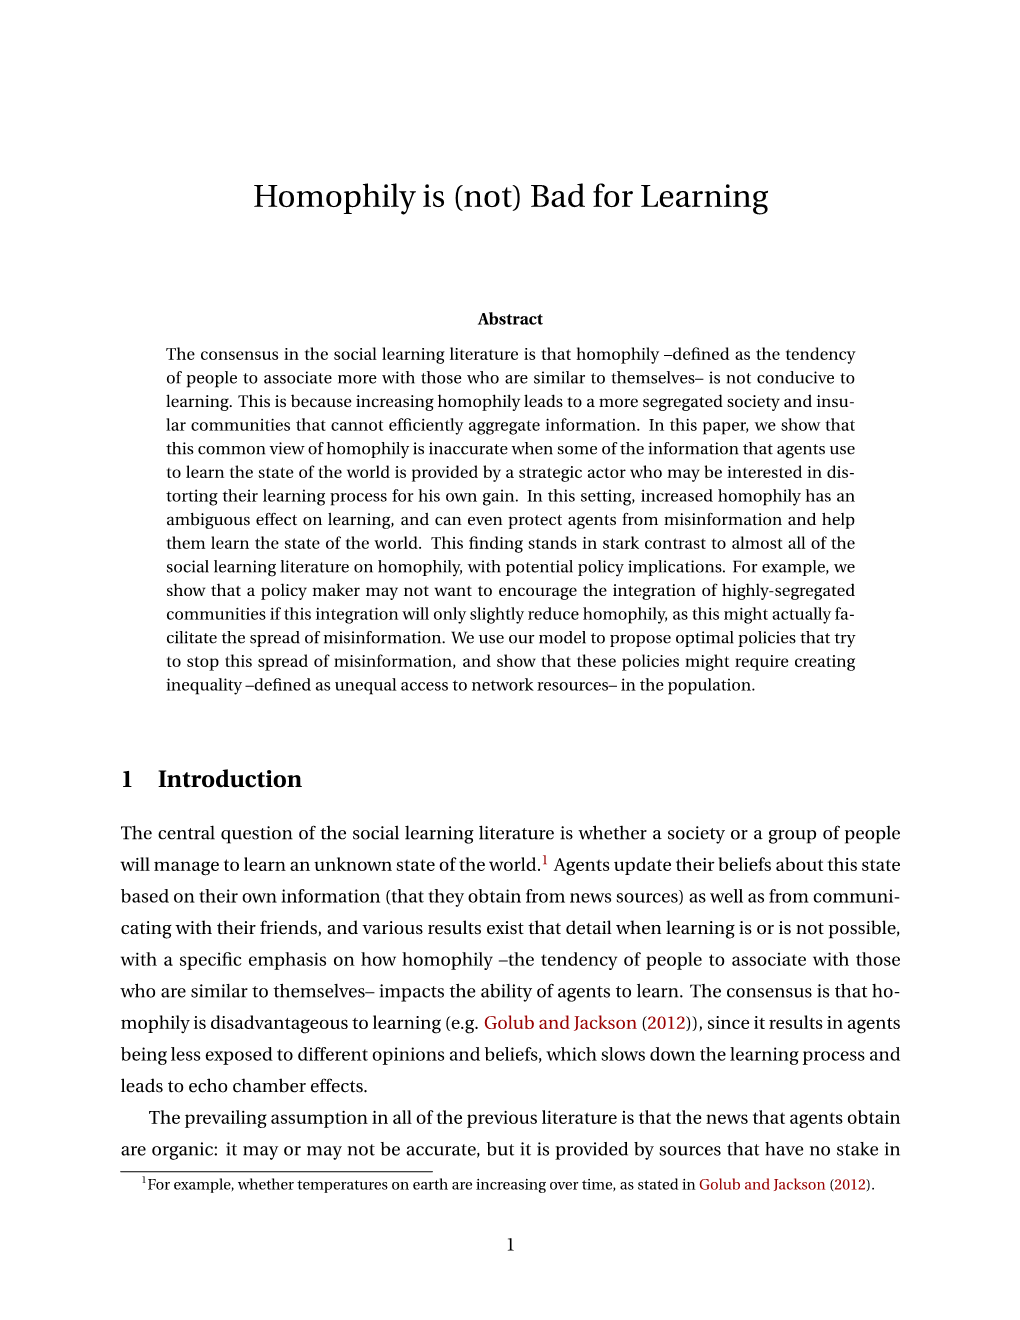 Homophily Is (Not) Bad for Learning